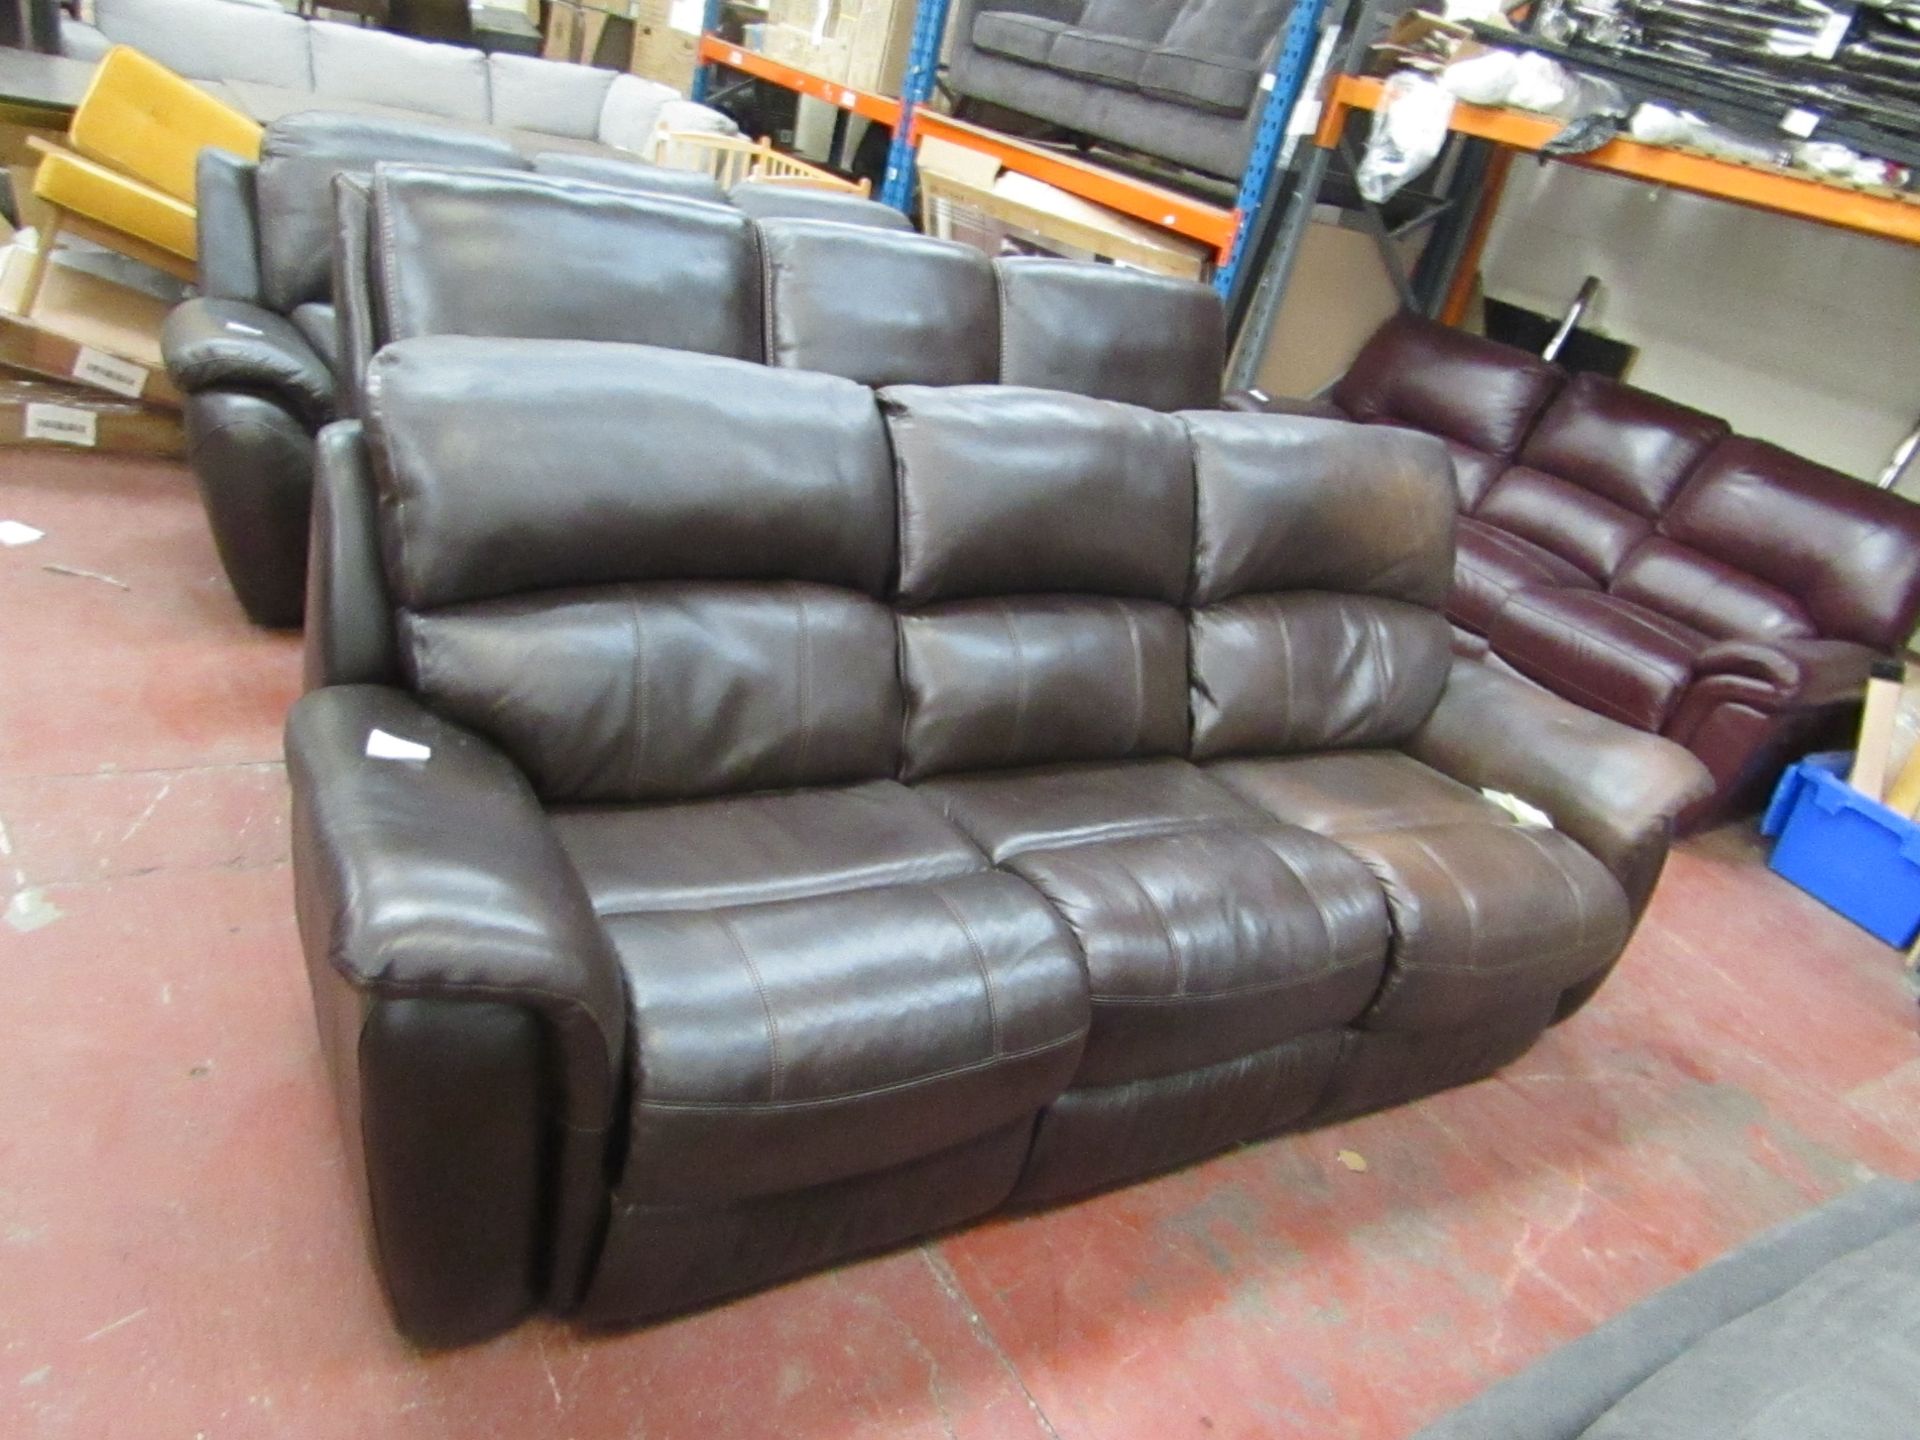 Polaski 3 seater manual reclining Brown leather sofa, both pop ups are working, one seat show